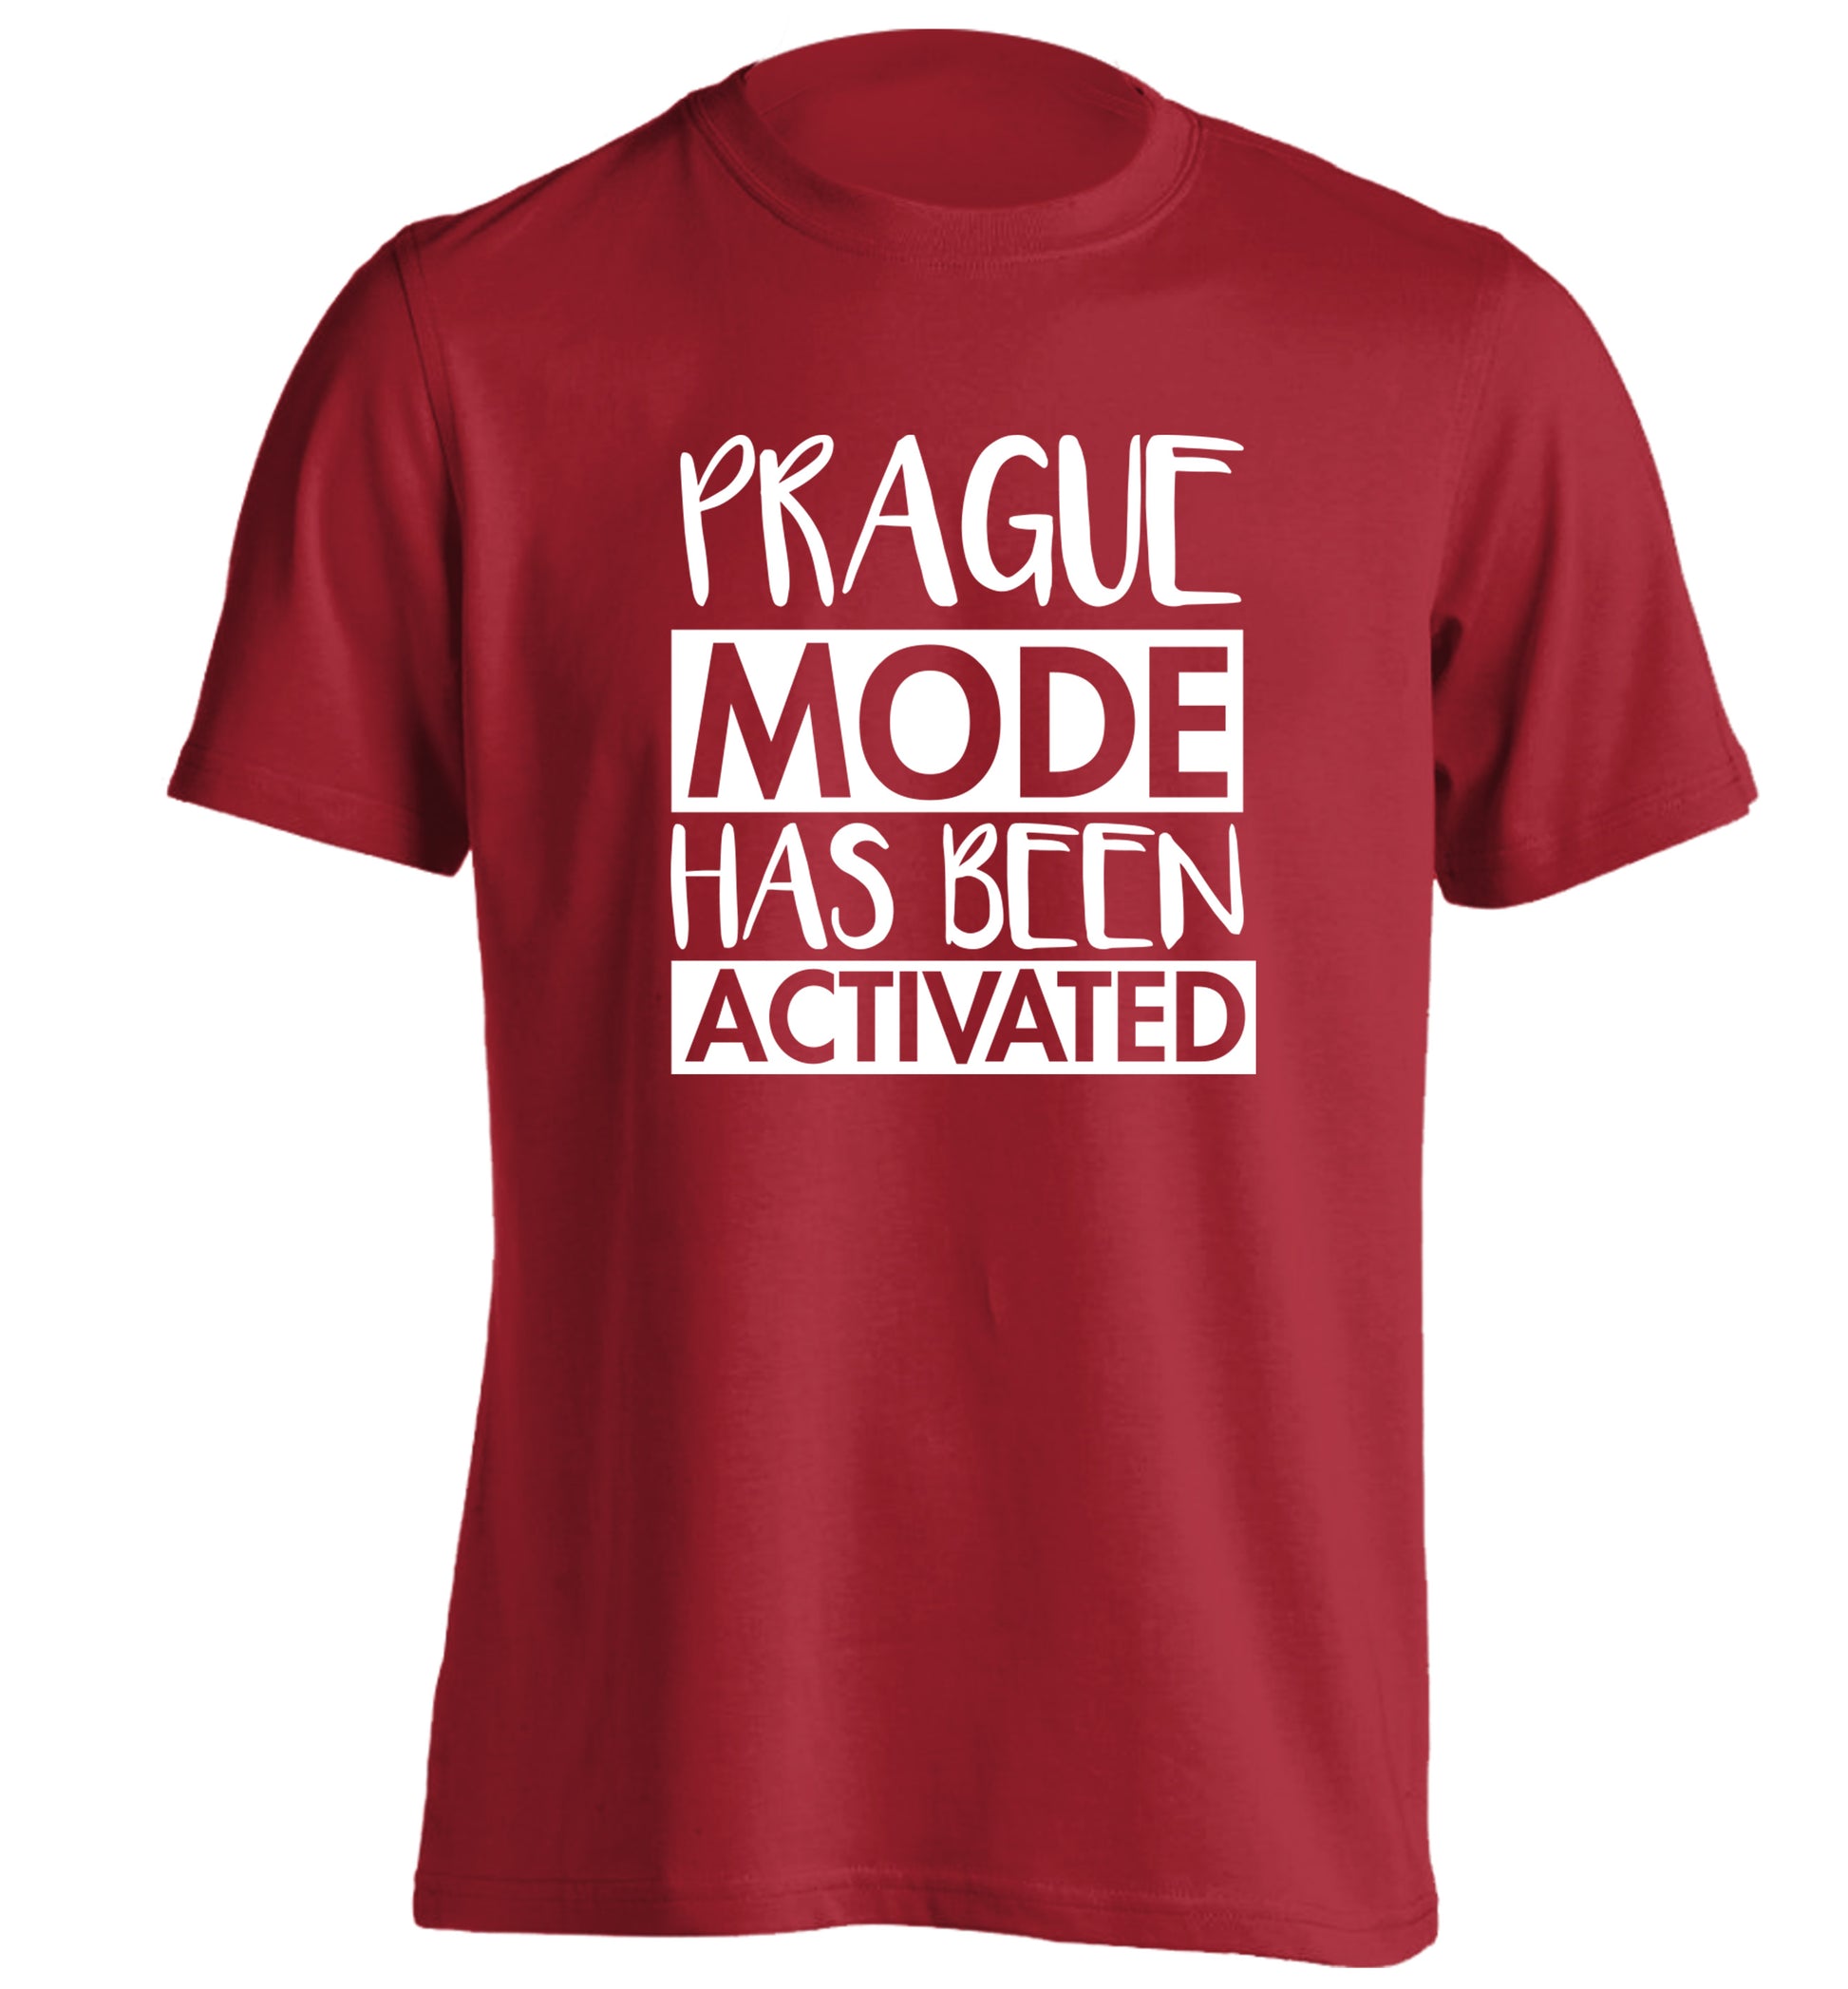 Prague mode has been activated adults unisex red Tshirt 2XL